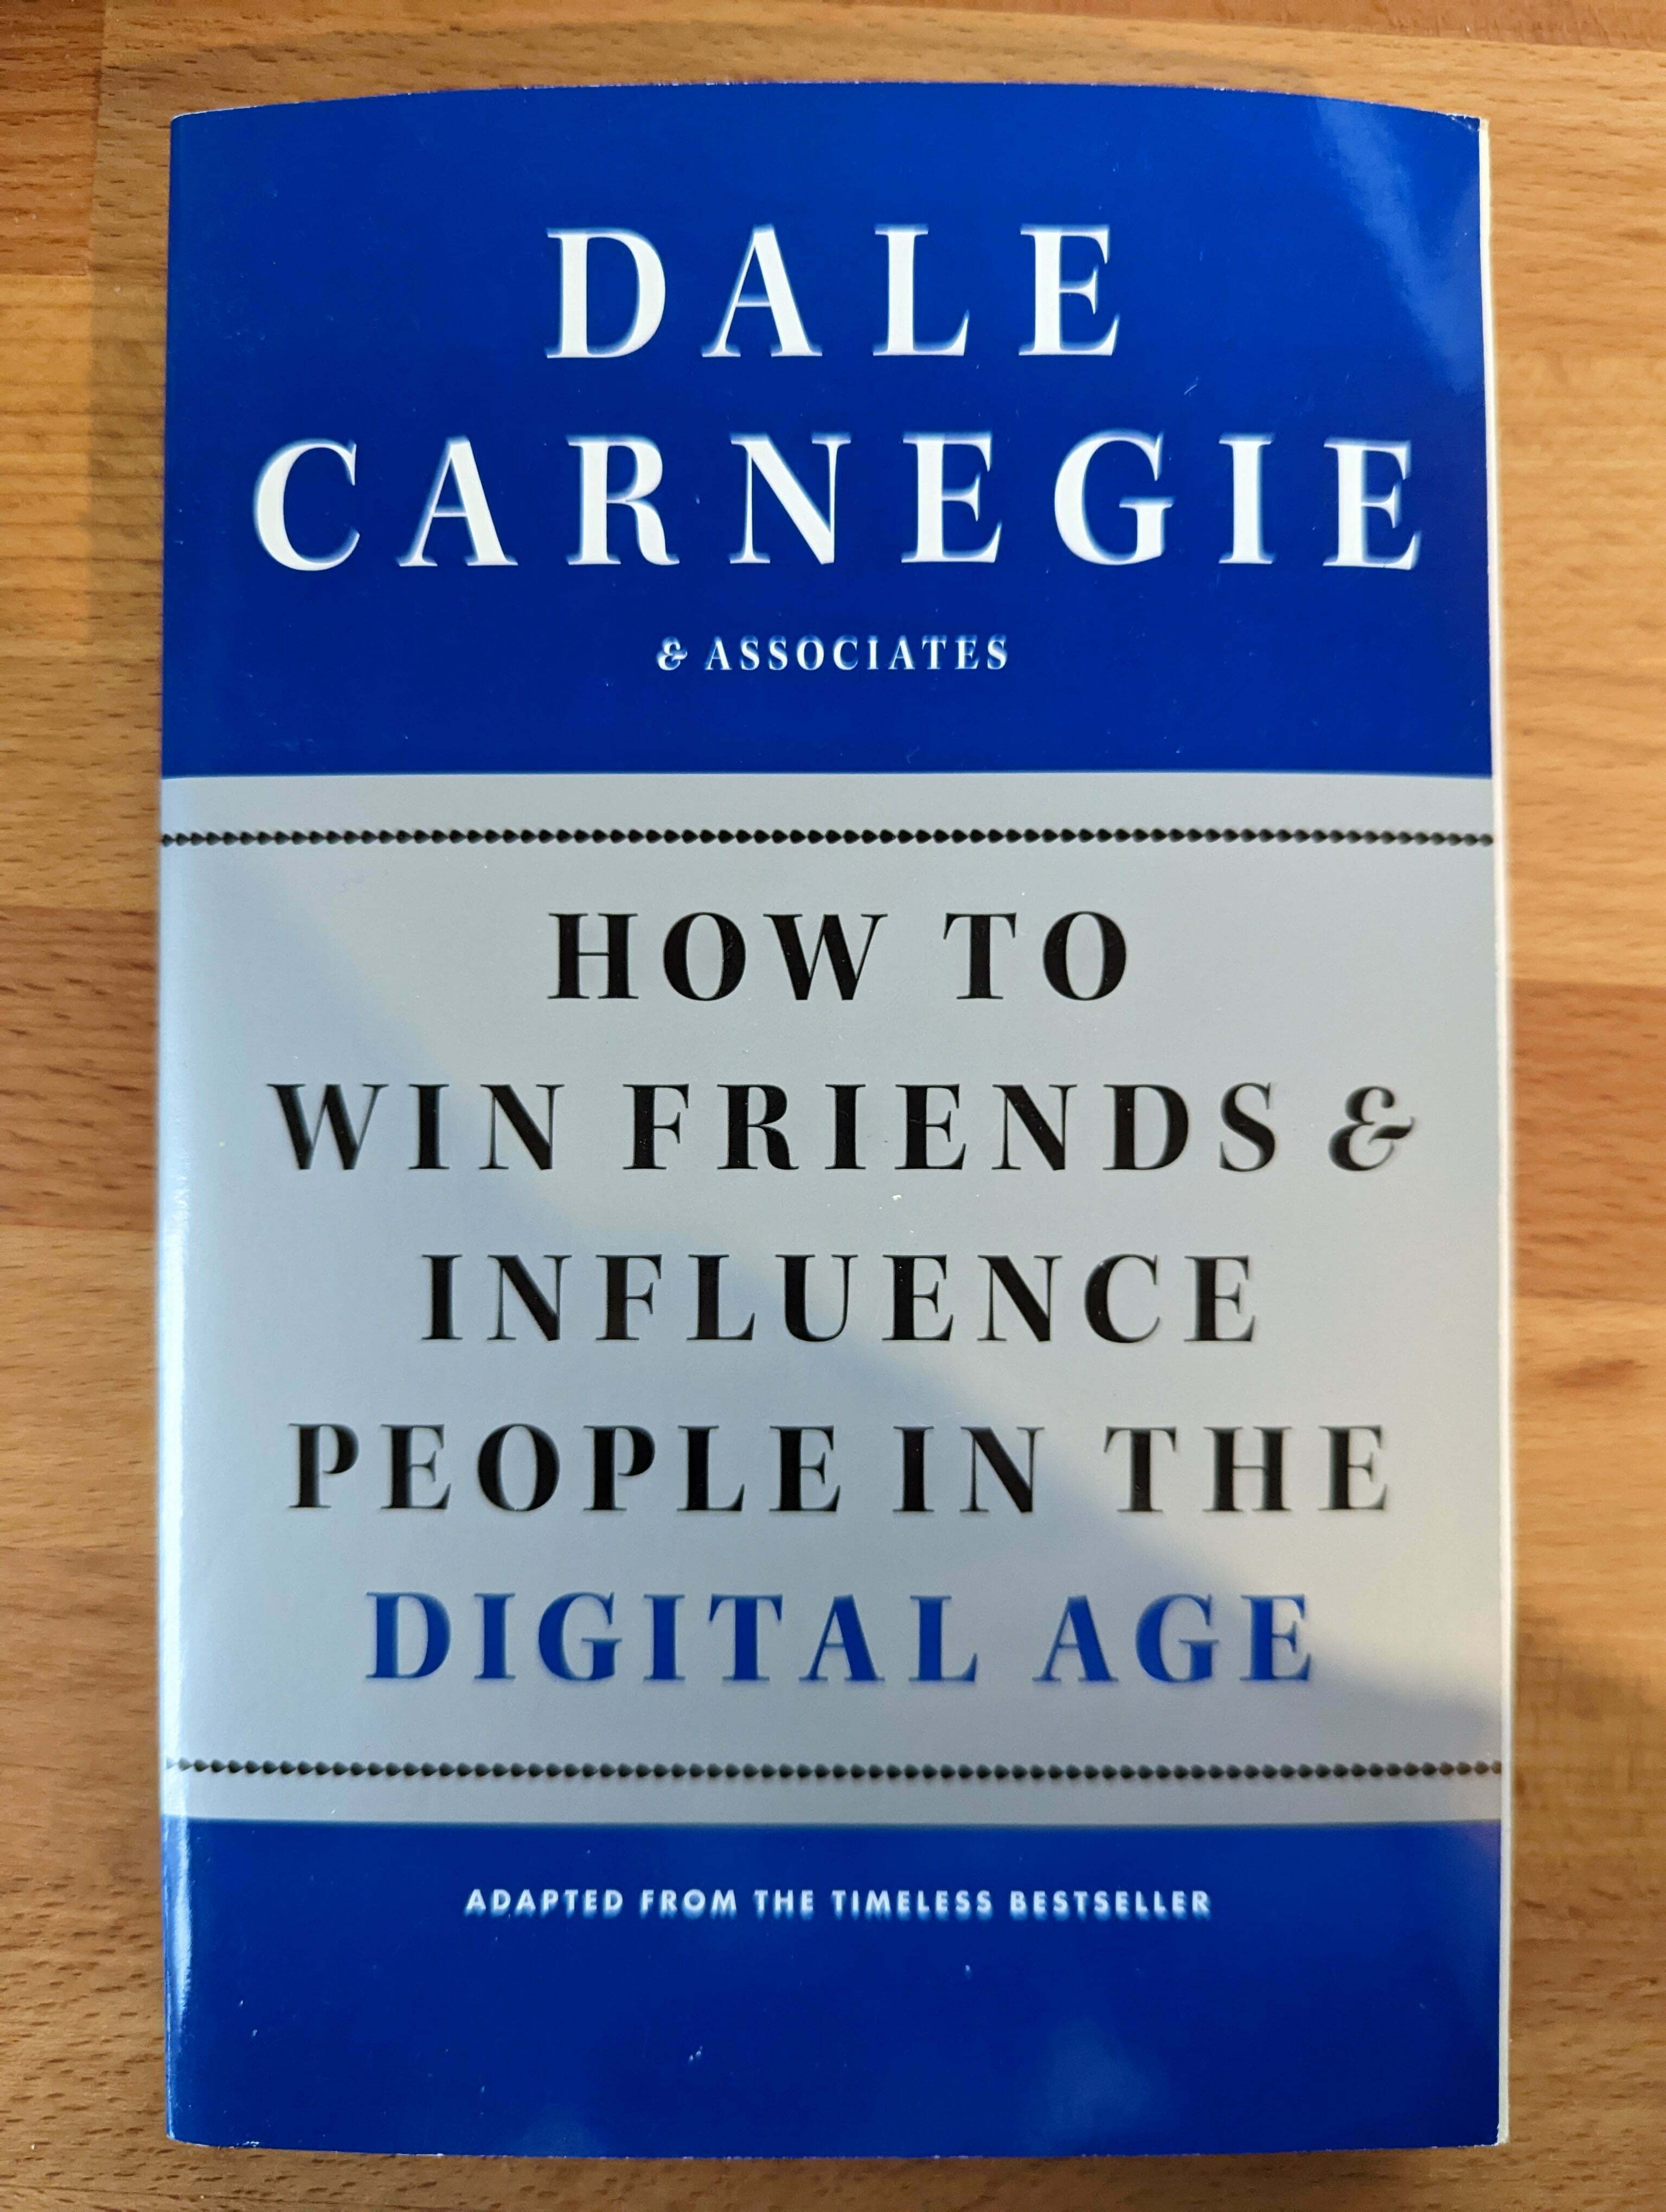 Book Notes – How to win Friends & Influence people in the digital age – Carnegie